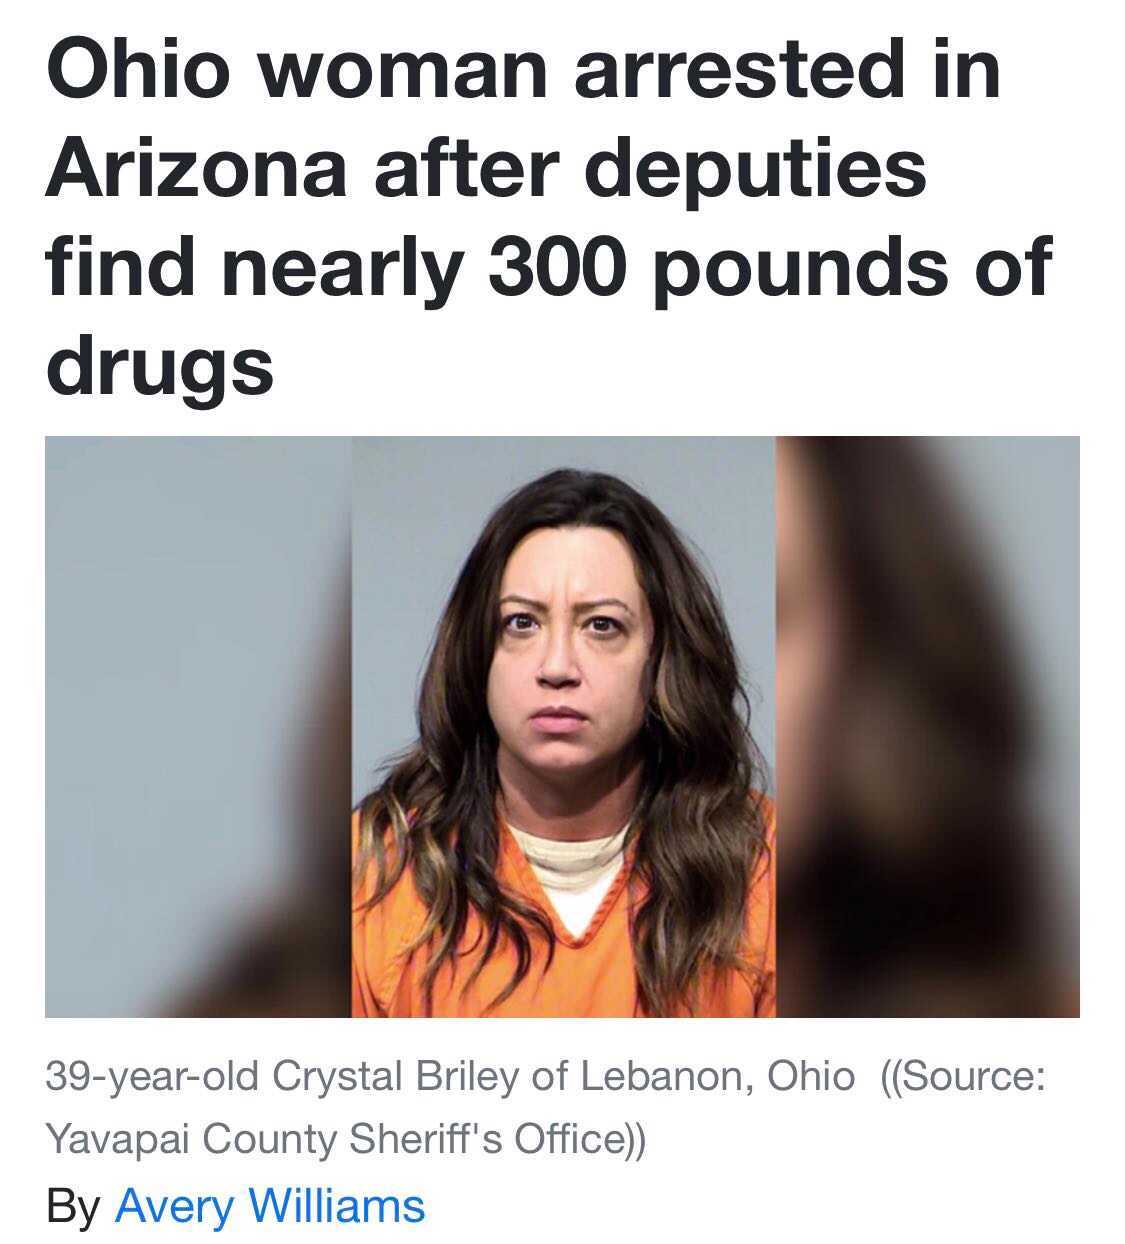 dentistry - Ohio woman arrested in Arizona after deputies find nearly 300 pounds of drugs 39yearold Crystal Briley of Lebanon, Ohio Source Yavapai County Sheriff's Office By Avery Williams